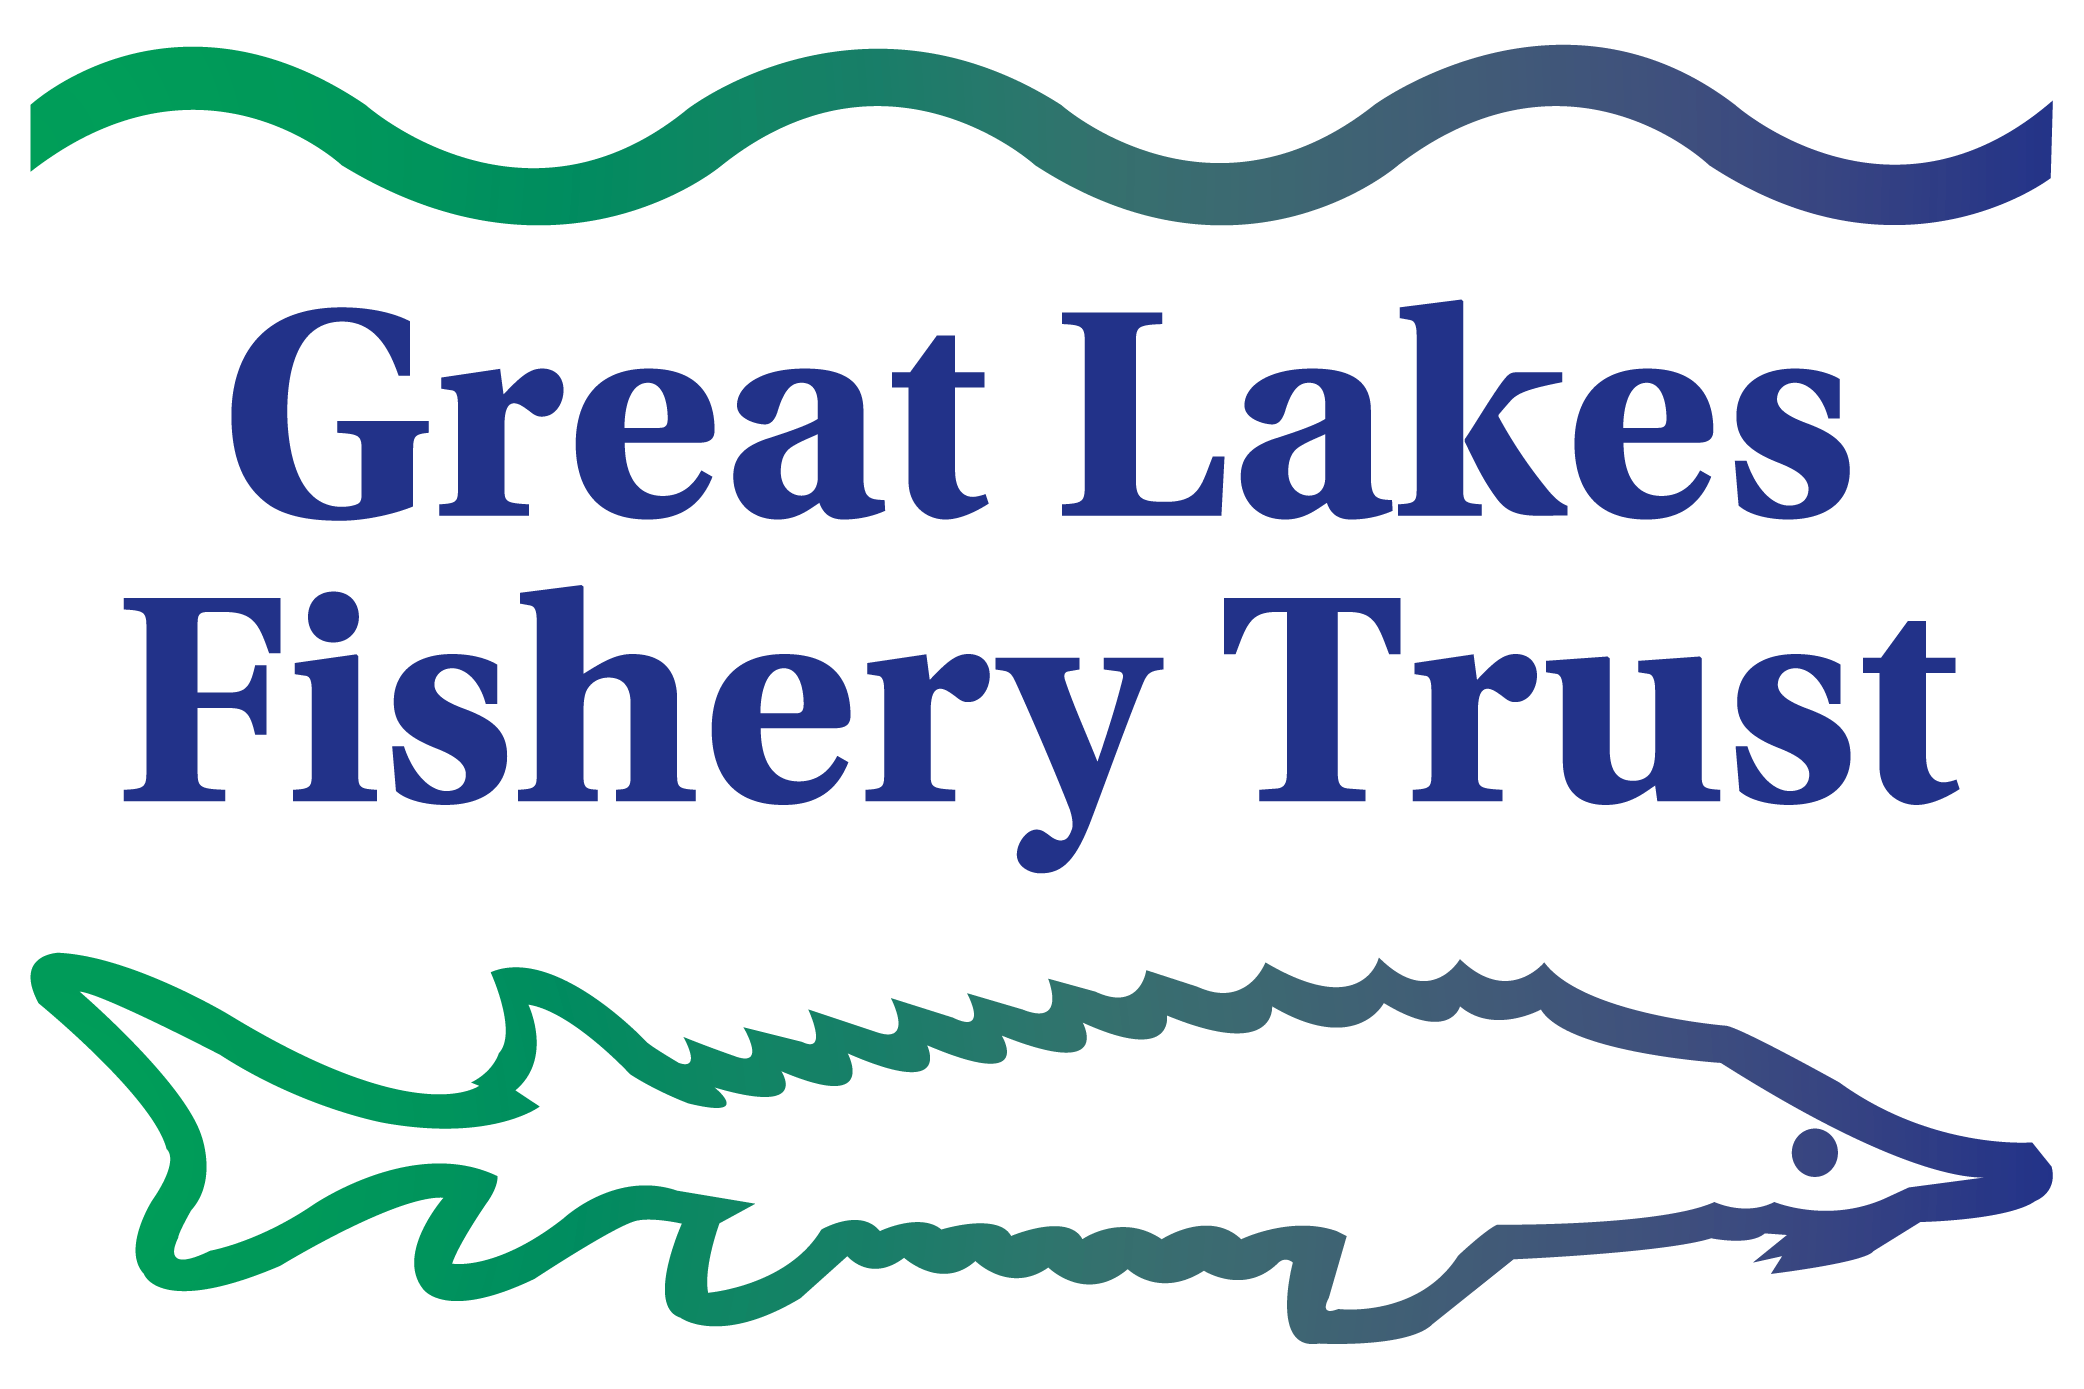 Great Lakes Fishery Trust